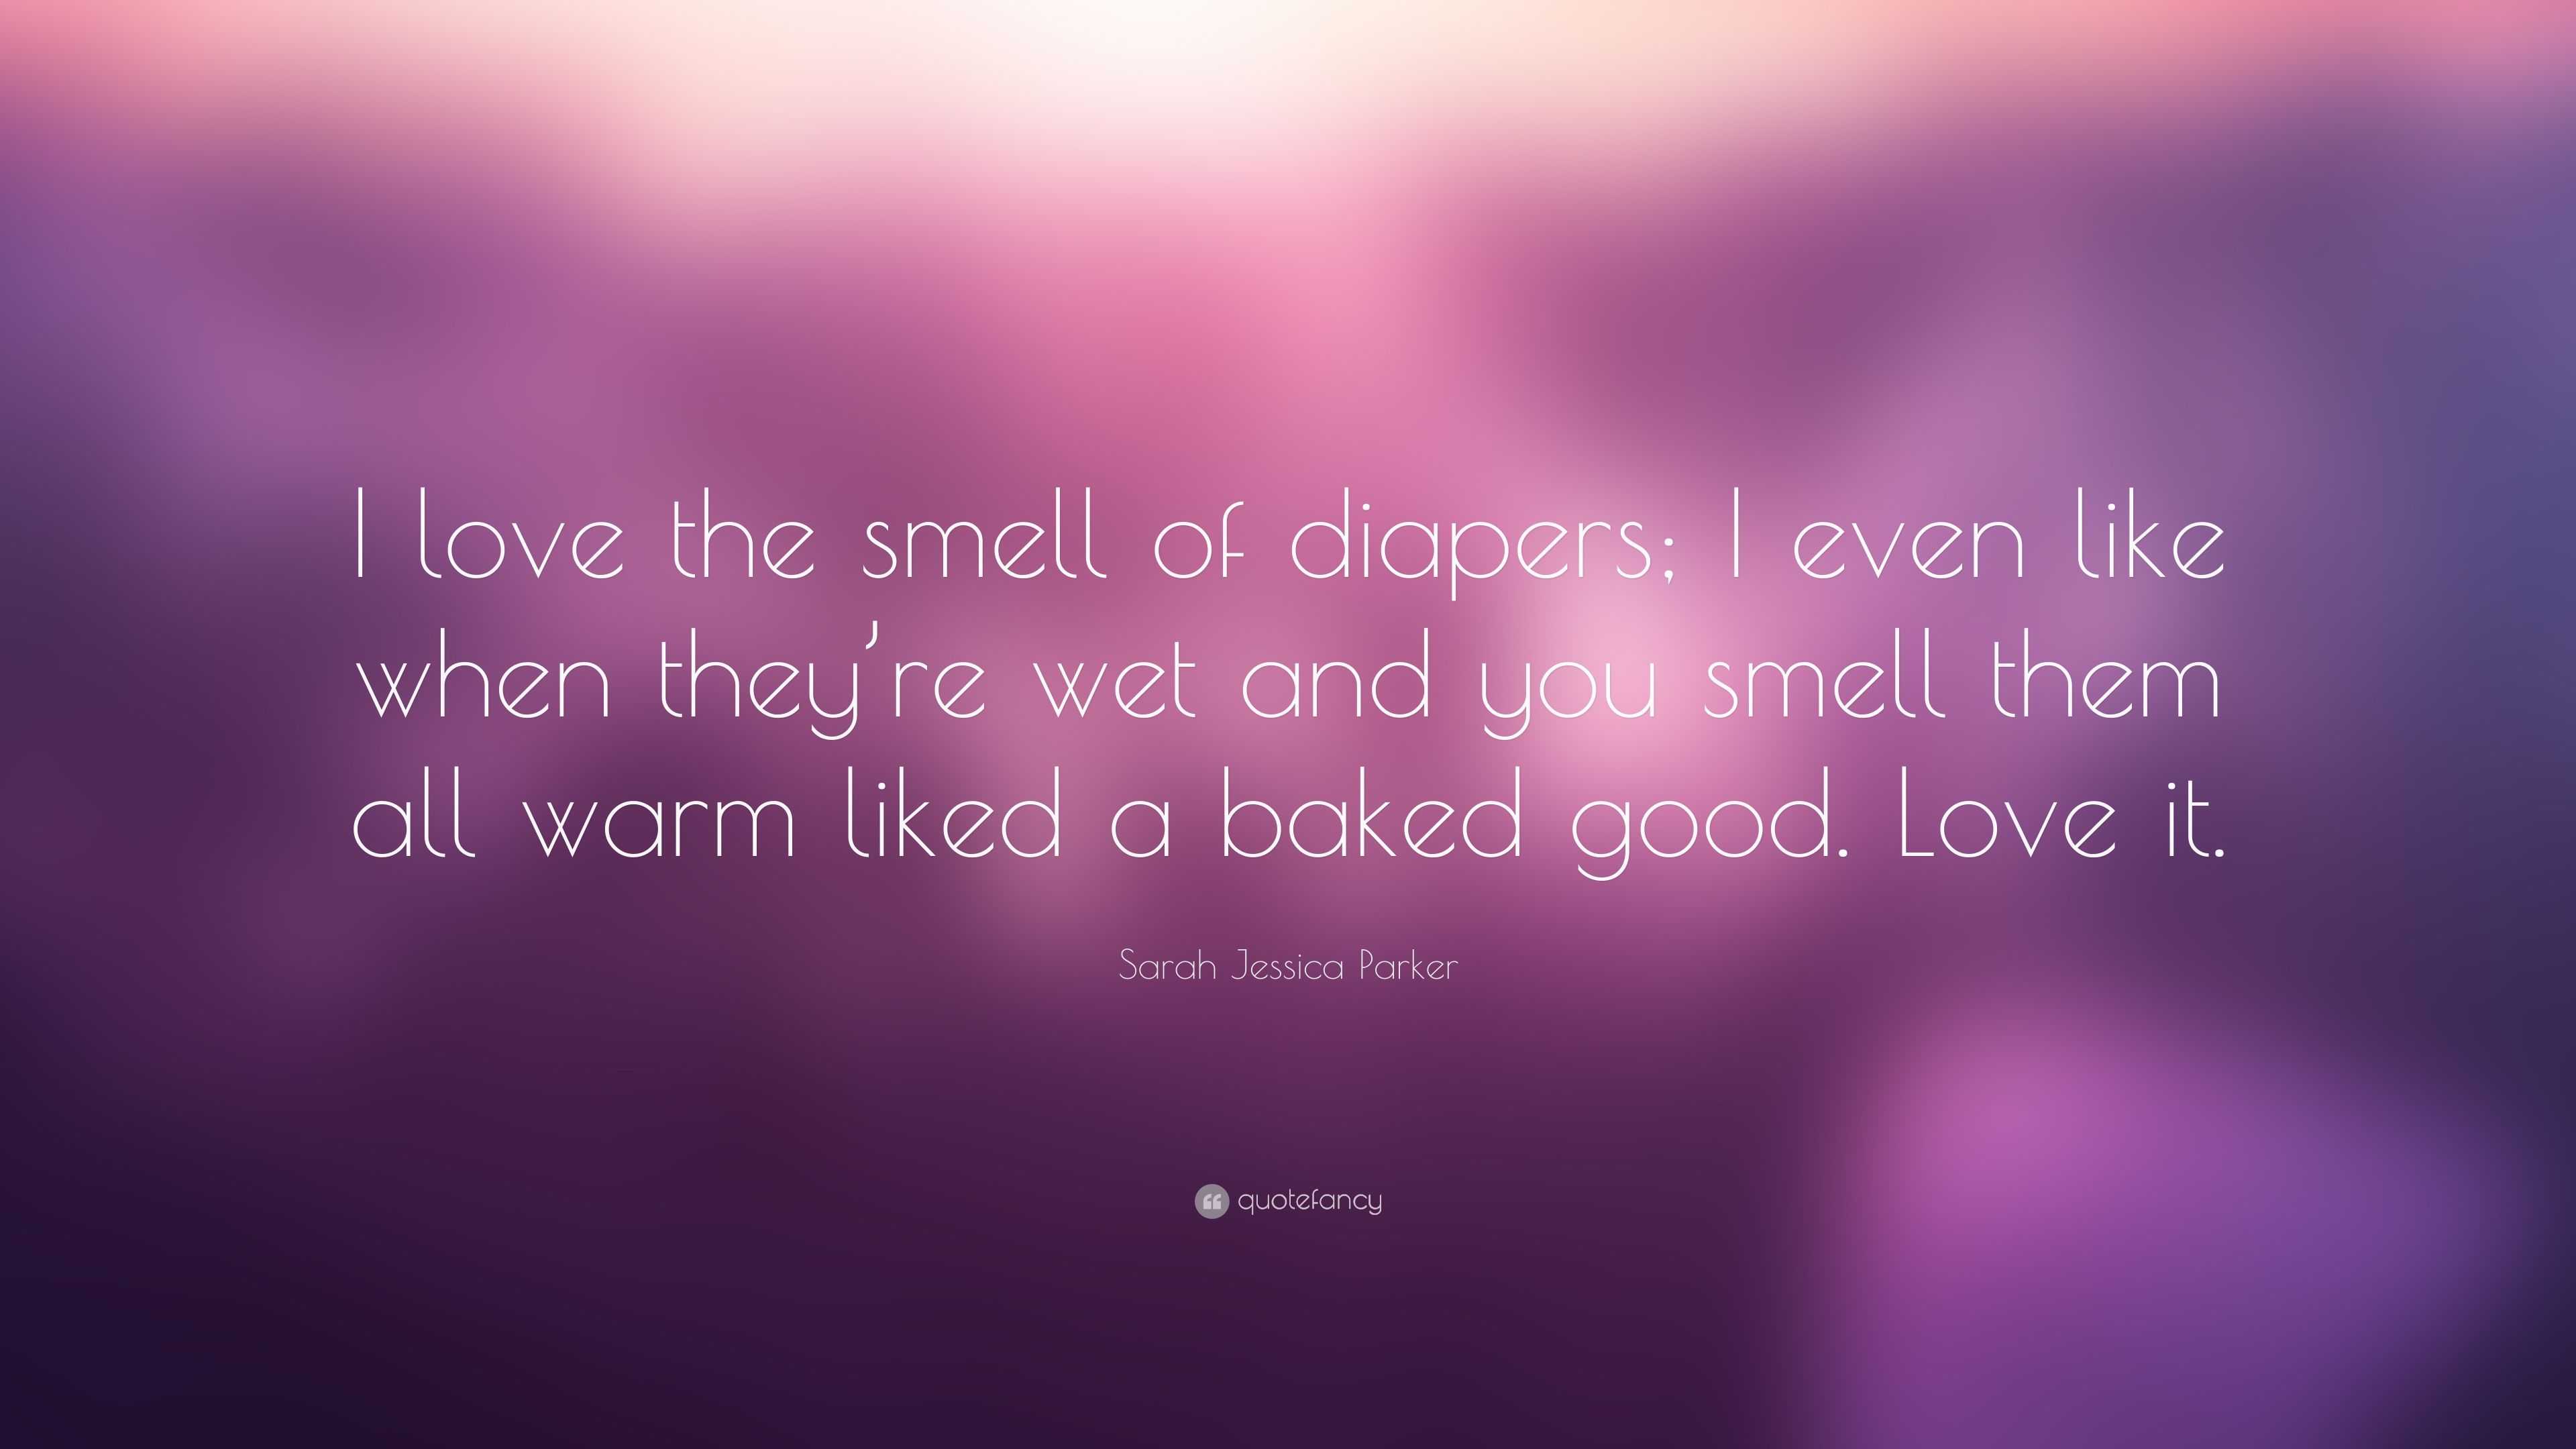 Sarah Jessica Parker Quote: "I love the smell of diapers ...